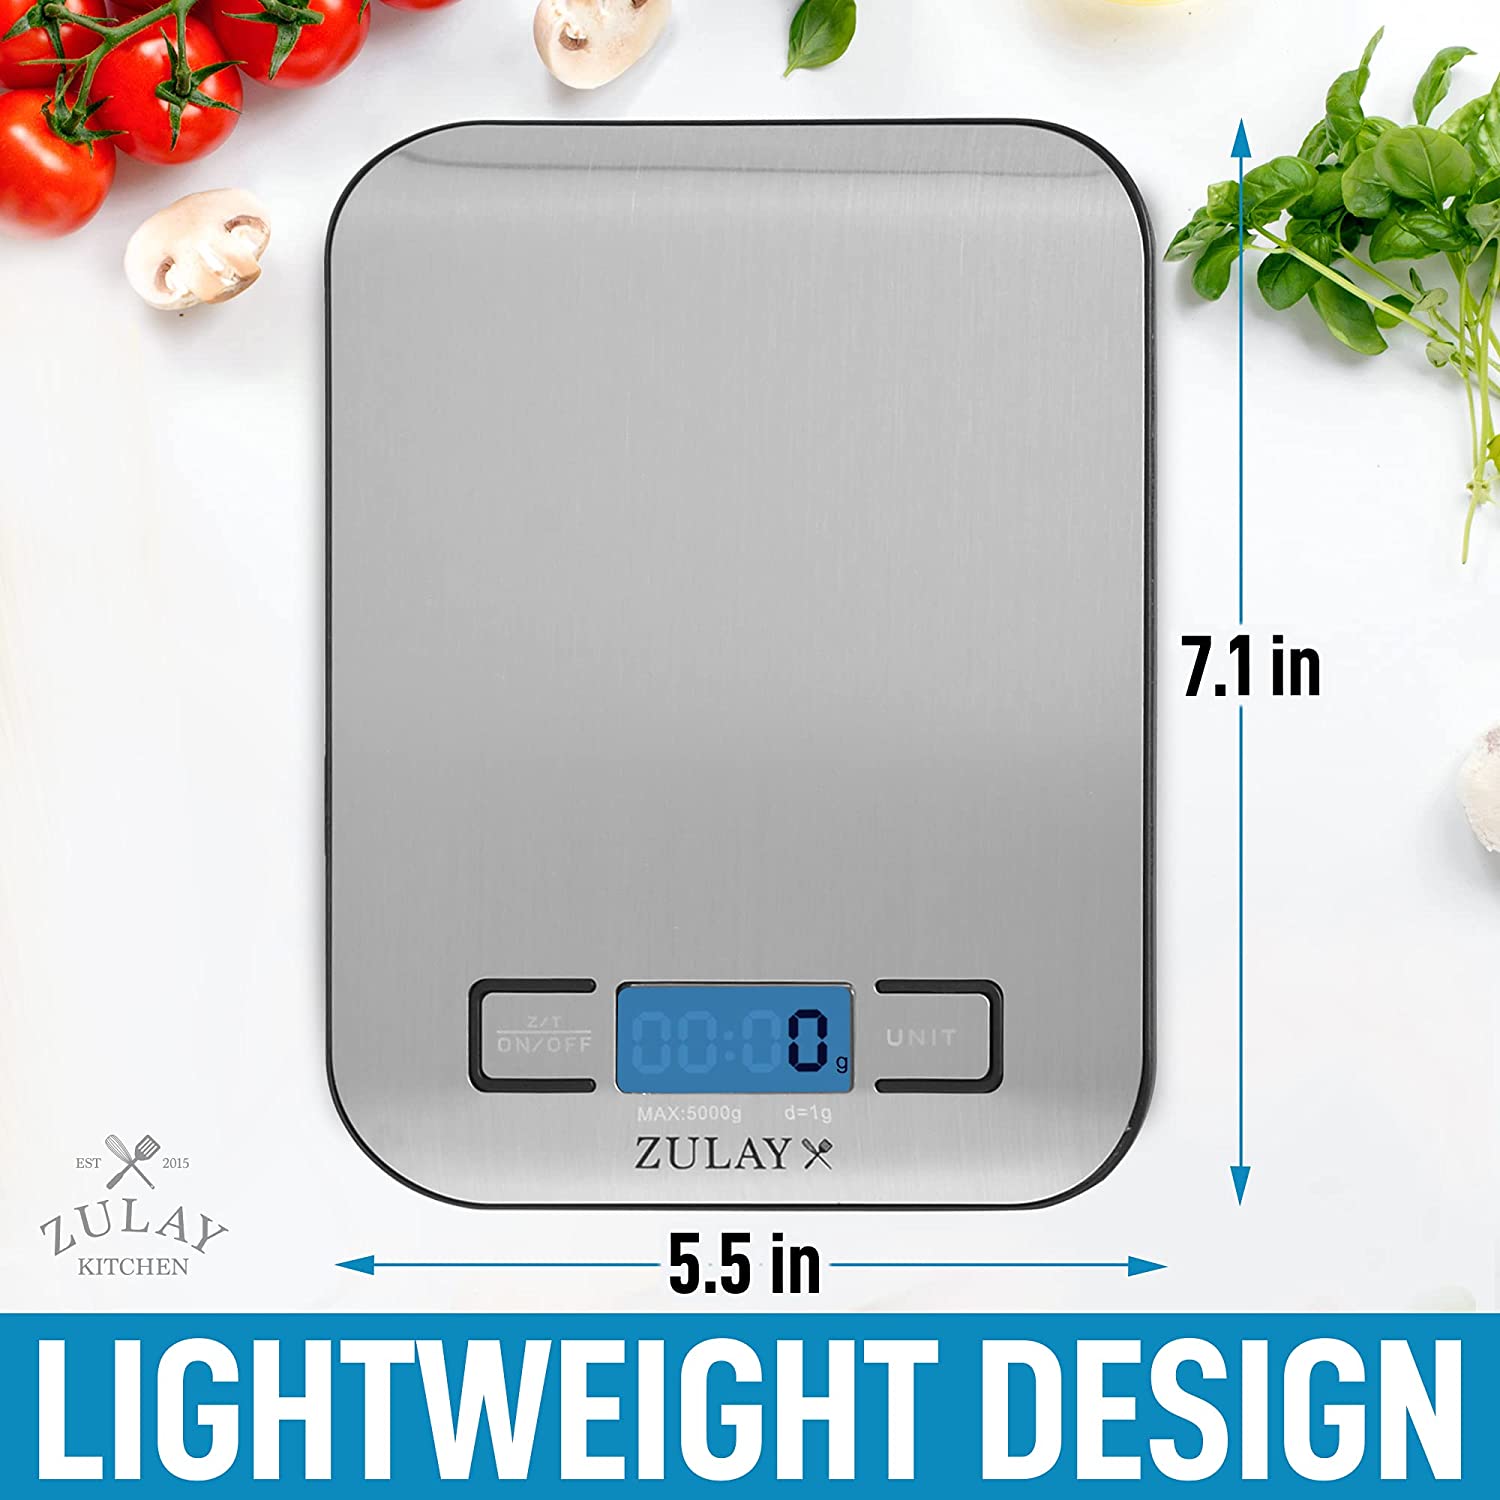 Precision Kitchen Food Scale for Baking Cooking LCD Digital Display  Lightweight